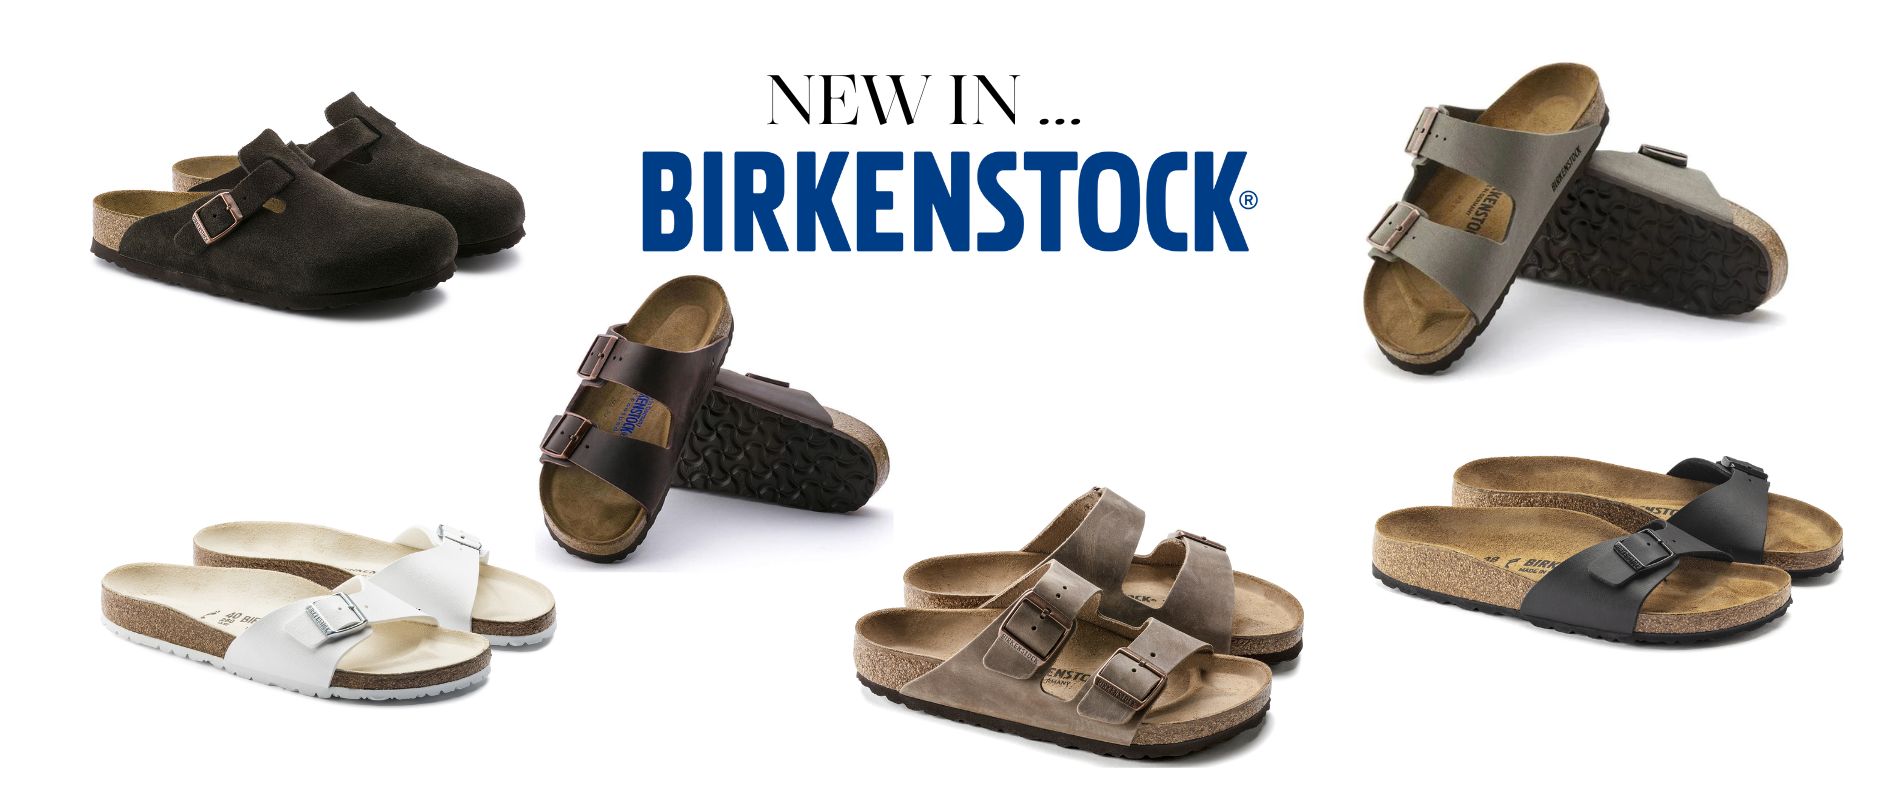 Birkenstock Sandals NZ - Issimo Shoes | Sale On Now